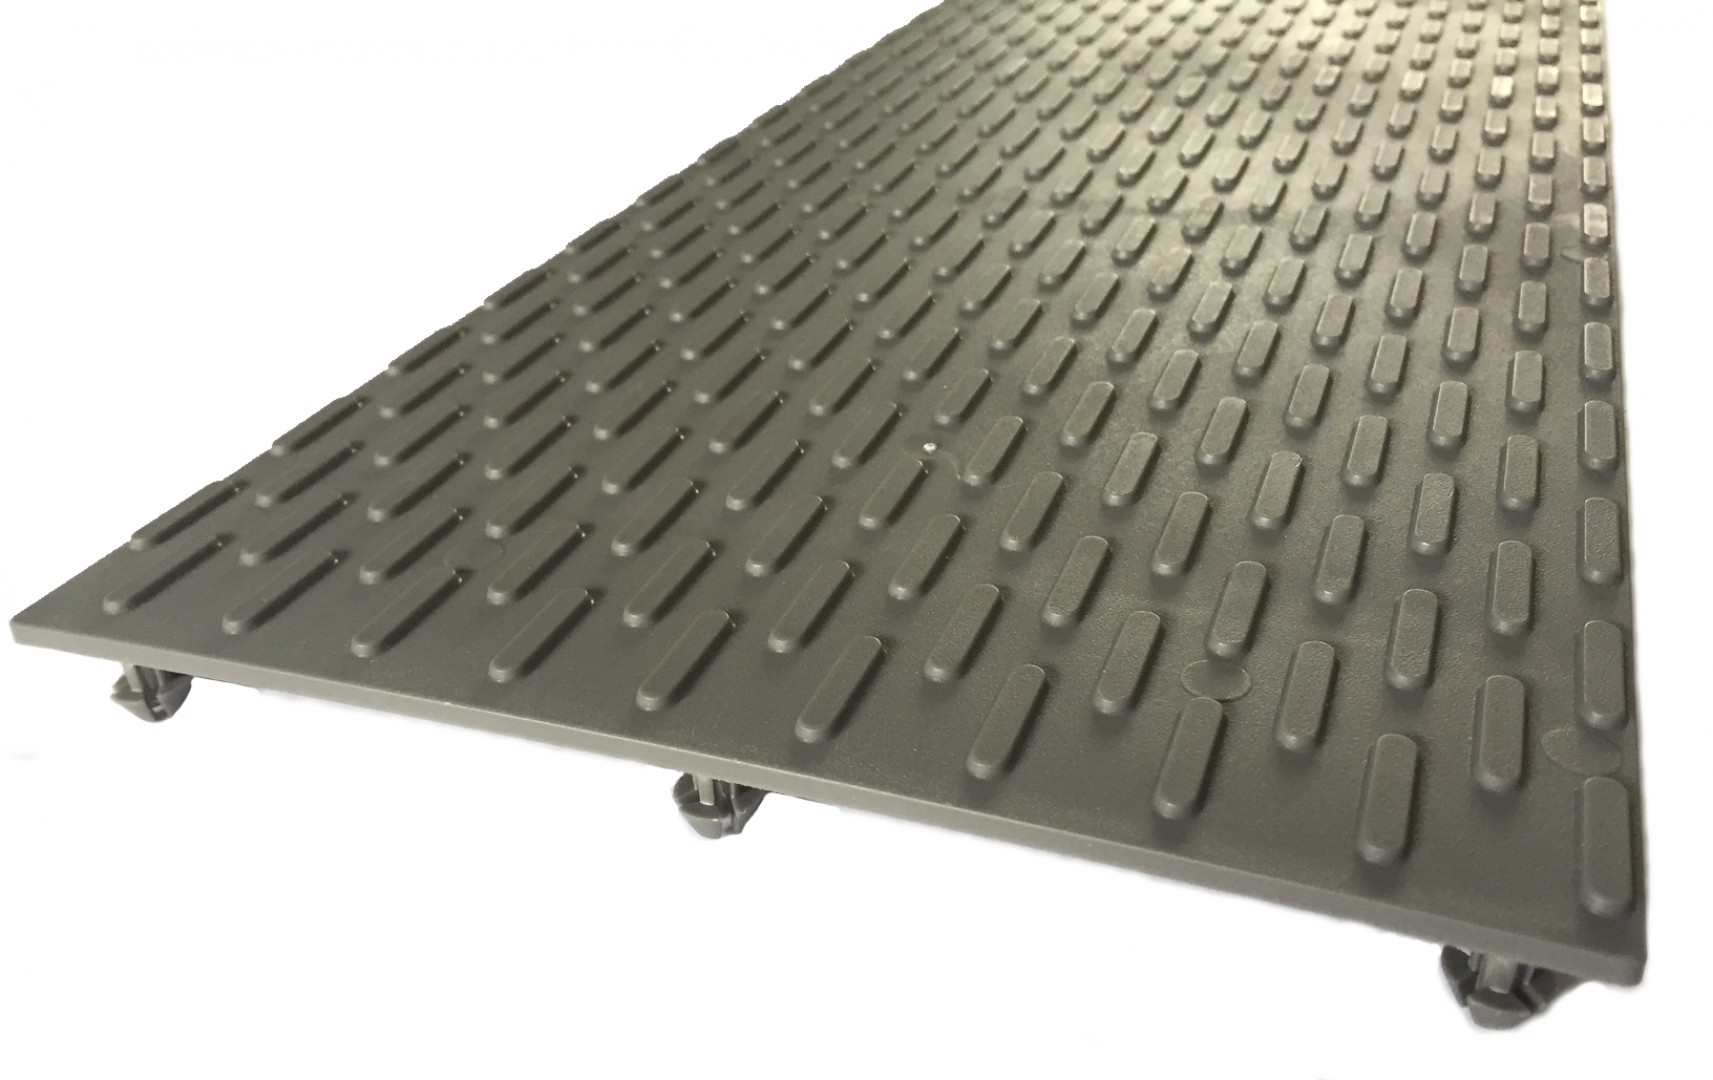 MEAfloor anti-skid R11 grating support studded approx. 800x200 mm gray